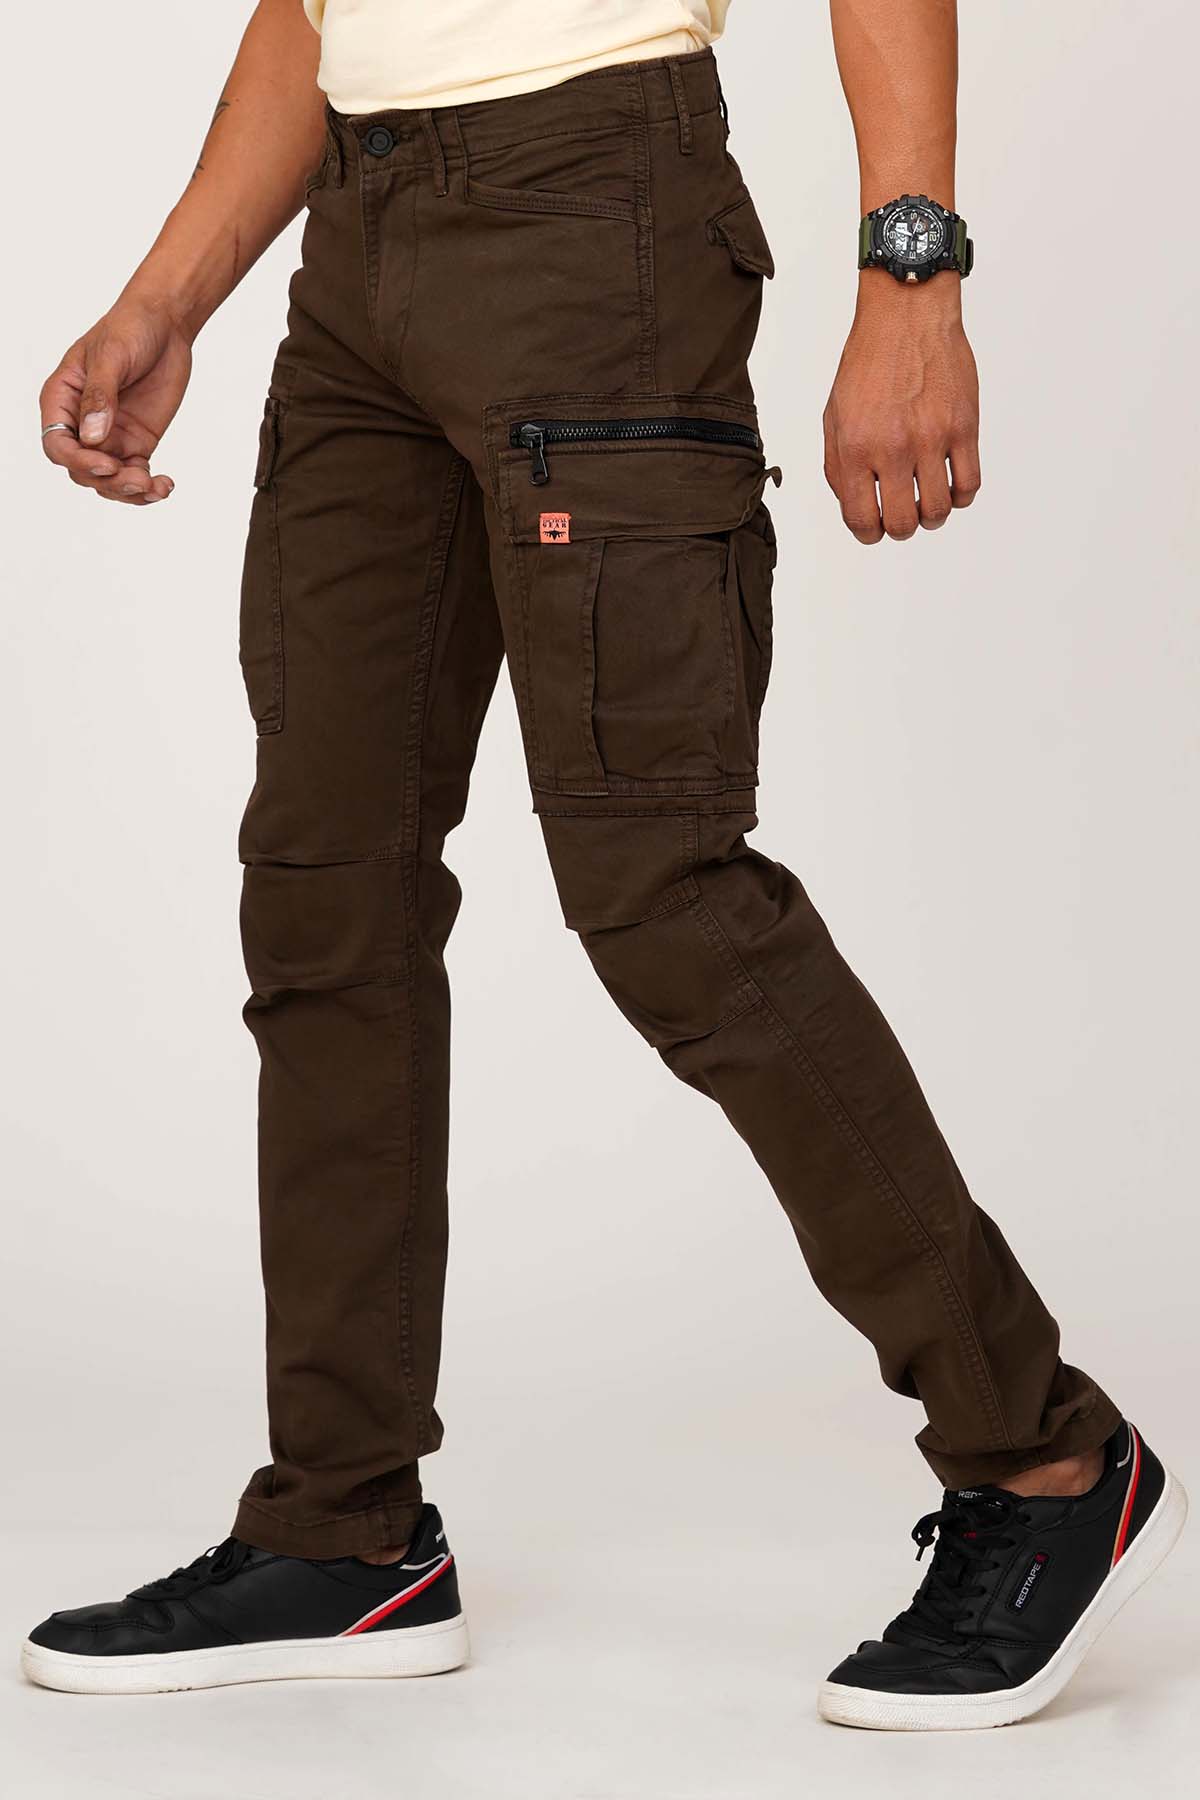 COFFEE BROWN COTTON SOLID CARGO PANT – ROOKIES